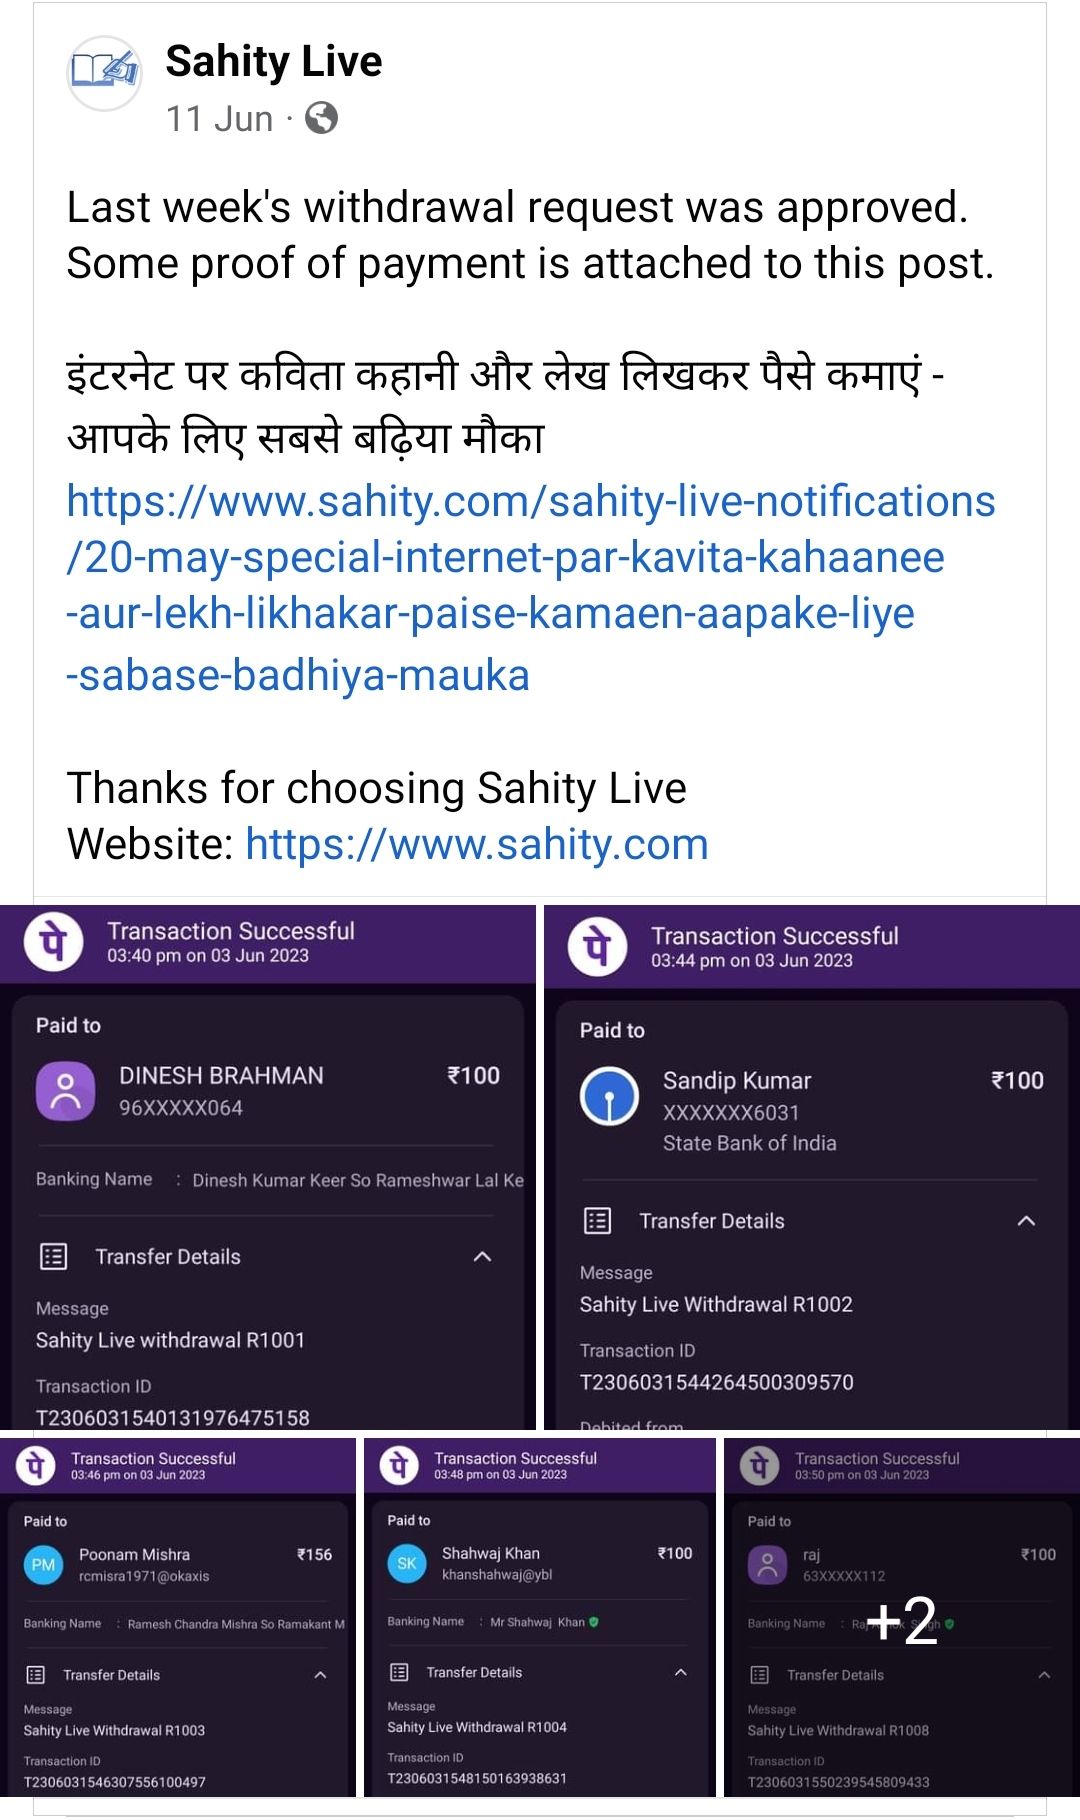 Sahity Live withdrawal request approved